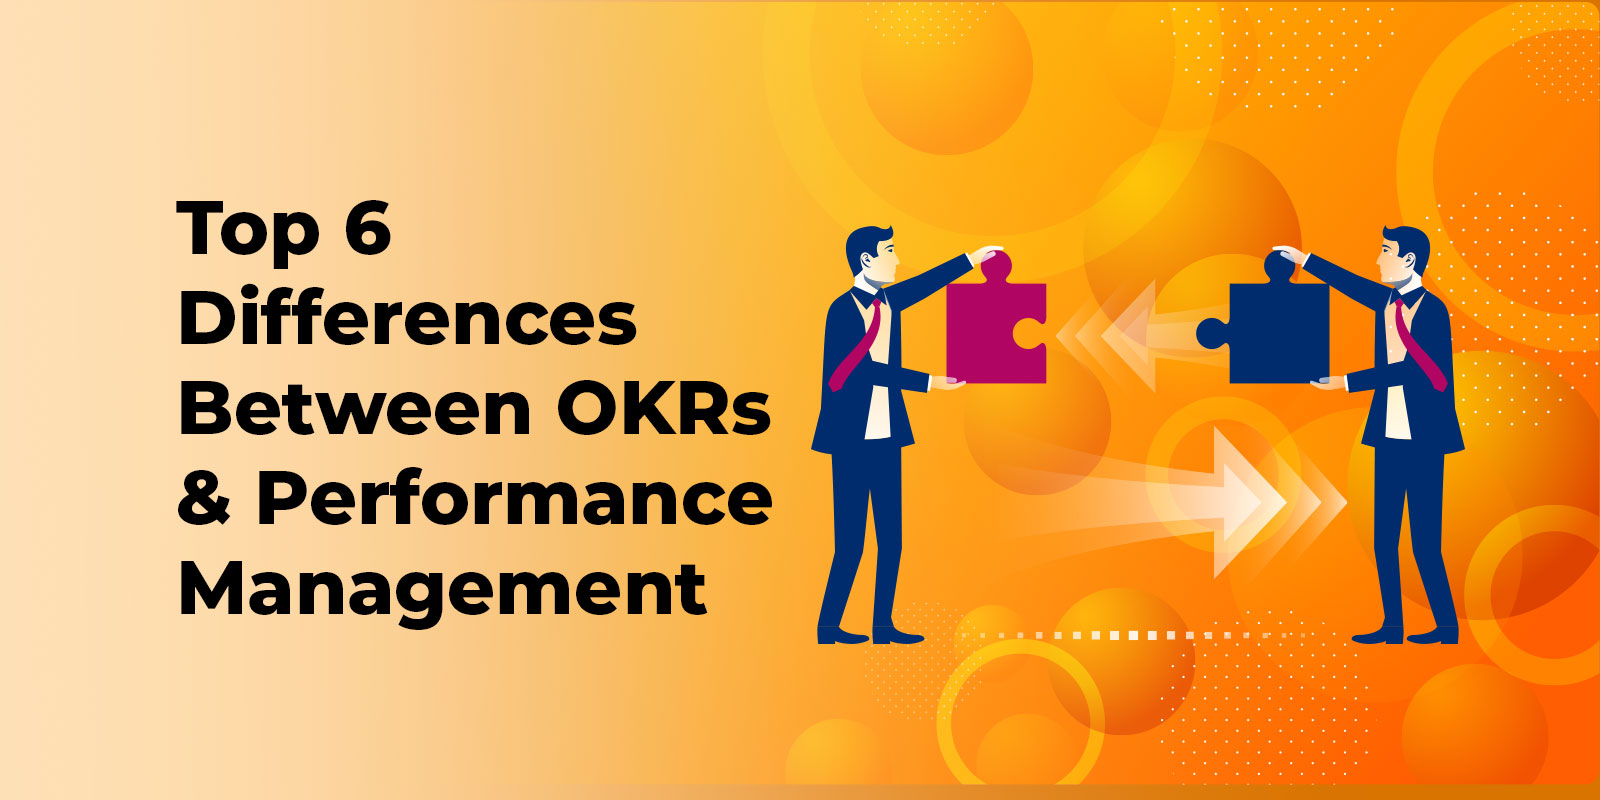 Top 6 Differences Between OKRs & Performance Management